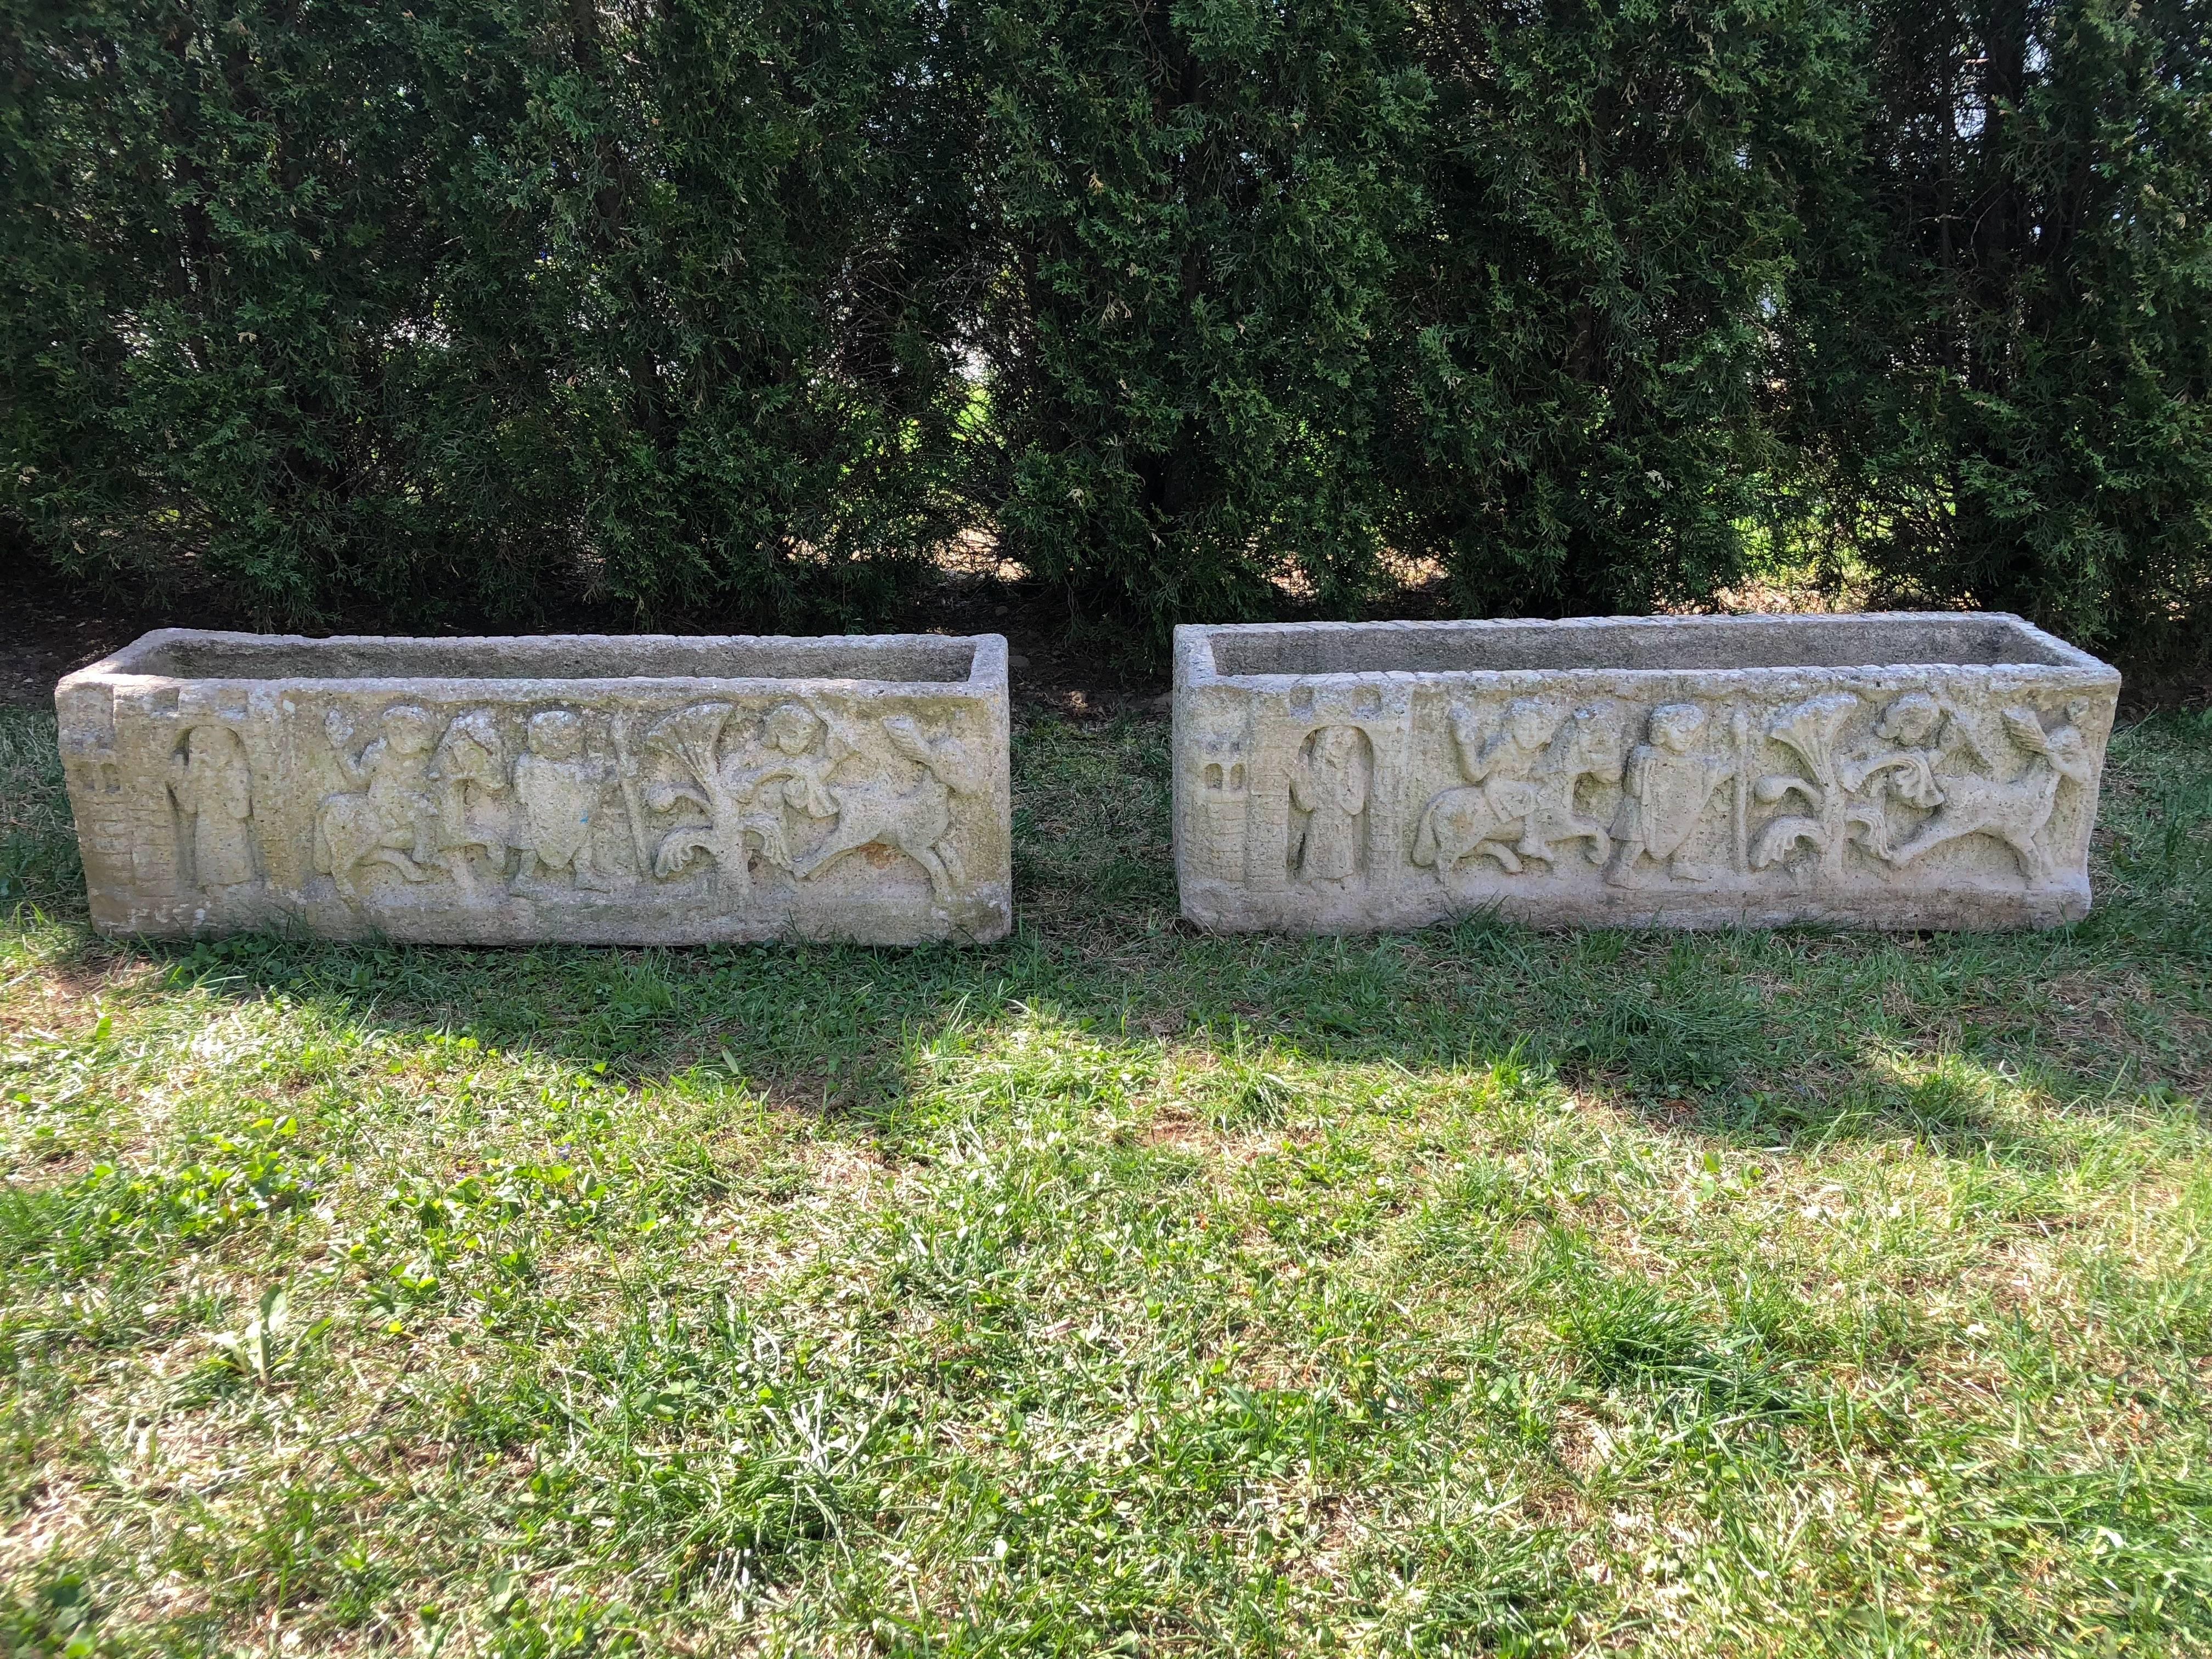 This long pair of cast stone jardinières features a creamy white surface with light gray weathering, and an intricate panel of deeply cast bas relief figures on the front side that tell a story. From the left-hand side, we see the outline of a